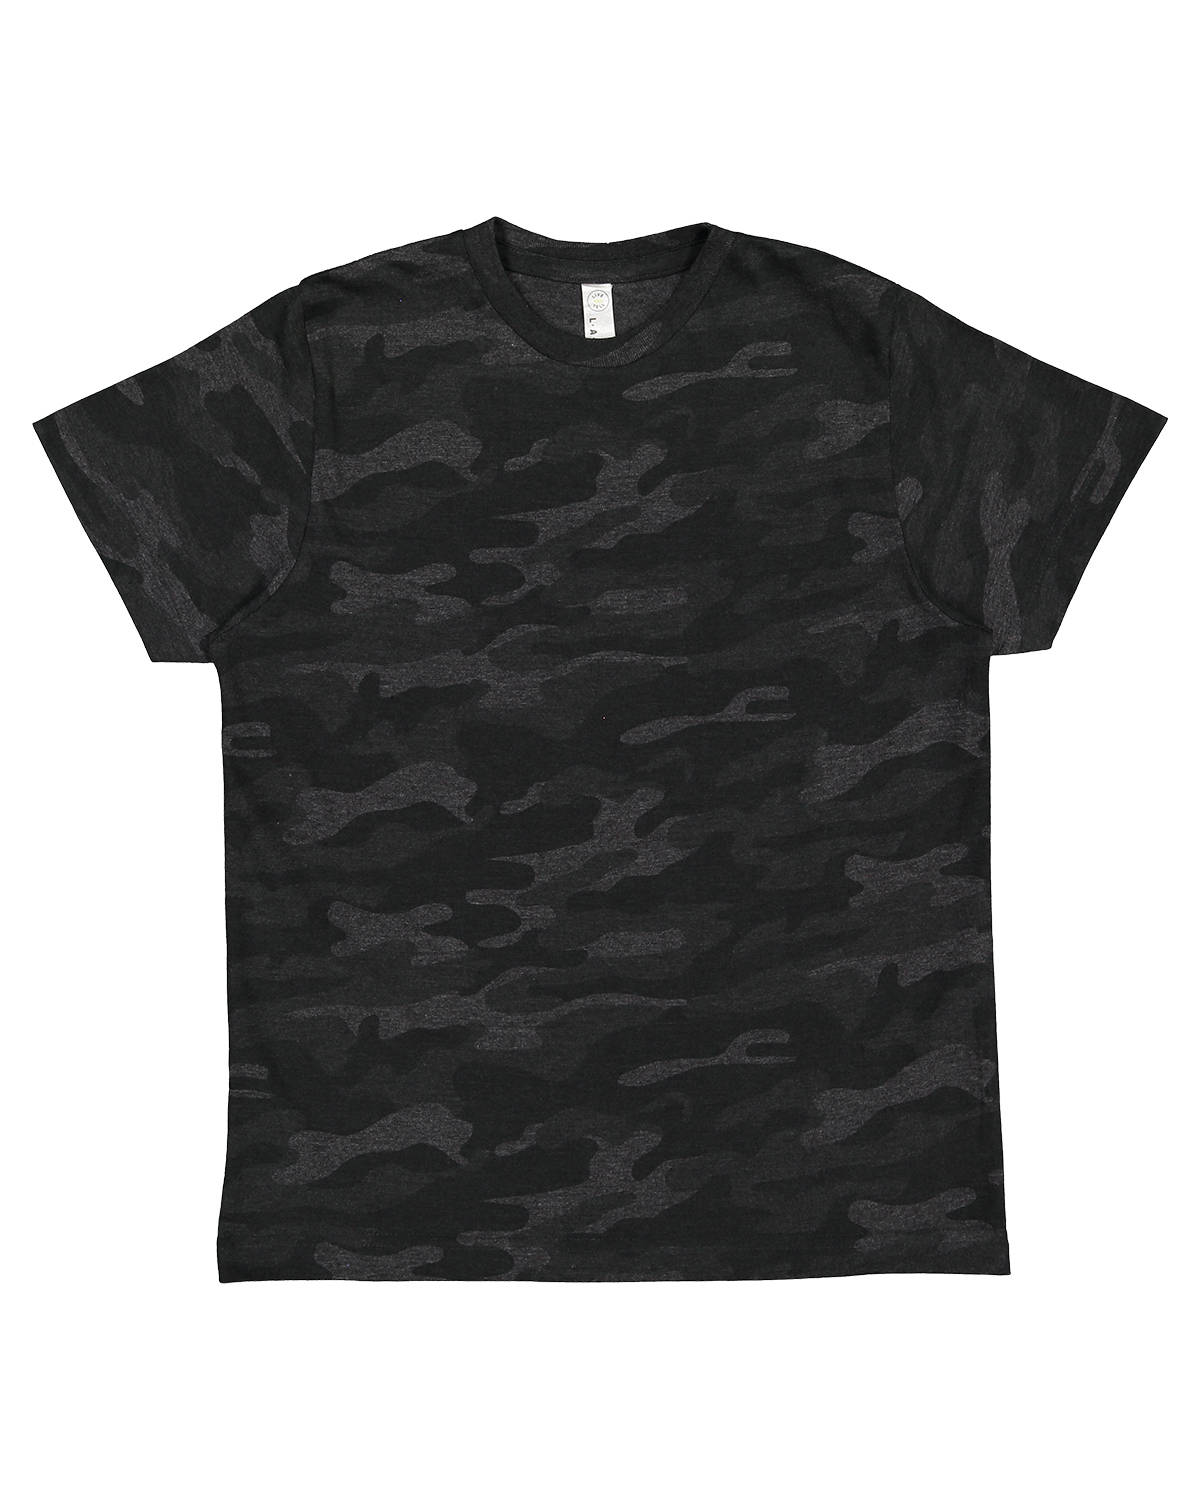 WSF Cotton Youth T-Shirt, in Black